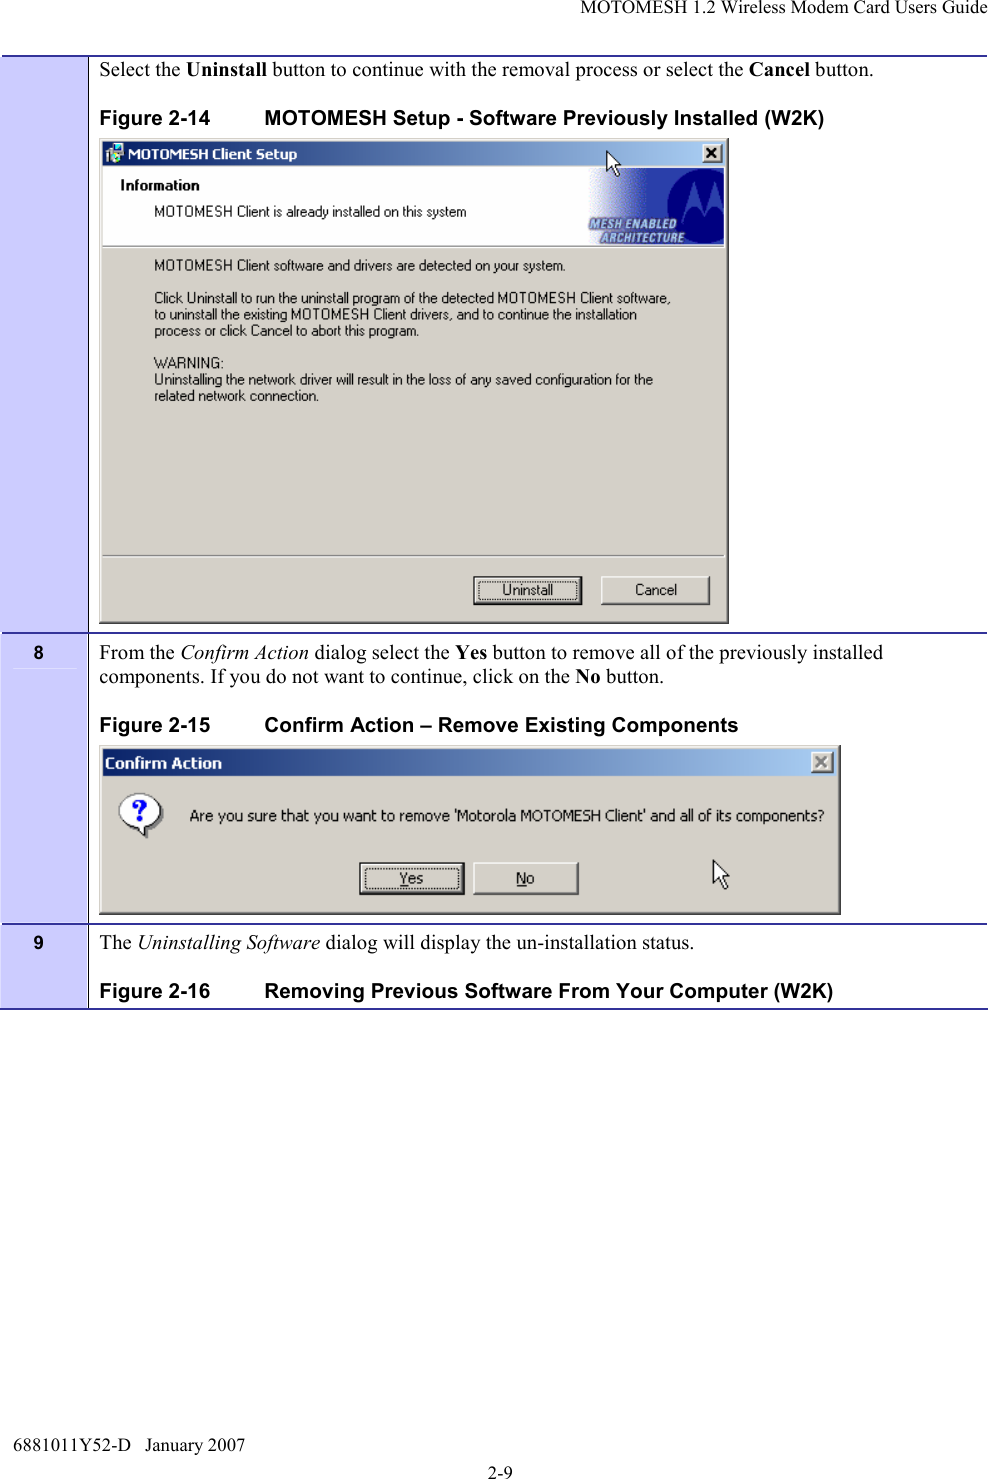 MOTOMESH 1.2 Wireless Modem Card Users Guide 6881011Y52-D   January 2007 2-9 Select the Uninstall button to continue with the removal process or select the Cancel button. Figure 2-14   MOTOMESH Setup - Software Previously Installed (W2K)  8  From the Confirm Action dialog select the Yes button to remove all of the previously installed components. If you do not want to continue, click on the No button. Figure 2-15  Confirm Action – Remove Existing Components  9  The Uninstalling Software dialog will display the un-installation status. Figure 2-16  Removing Previous Software From Your Computer (W2K) 